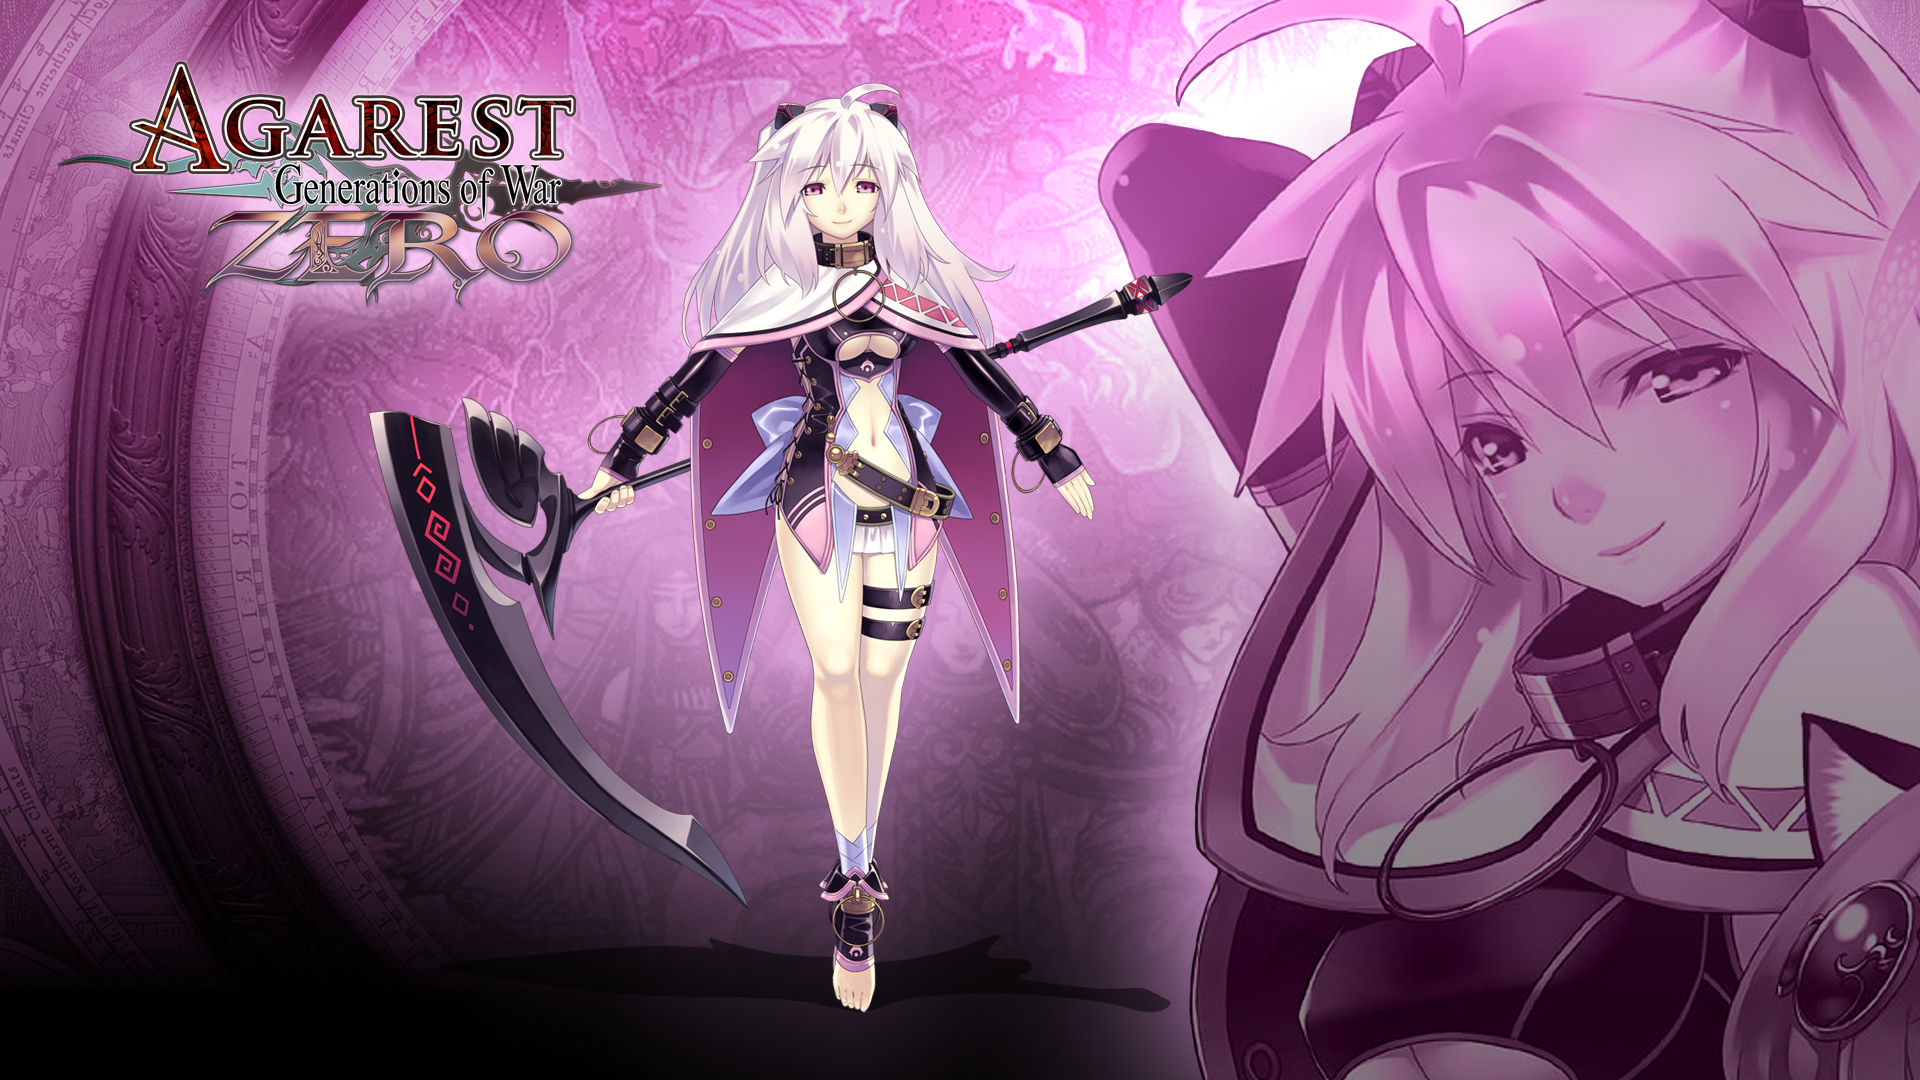 Agarest: Generations Of War Backgrounds, Compatible - PC, Mobile, Gadgets| 1920x1080 px